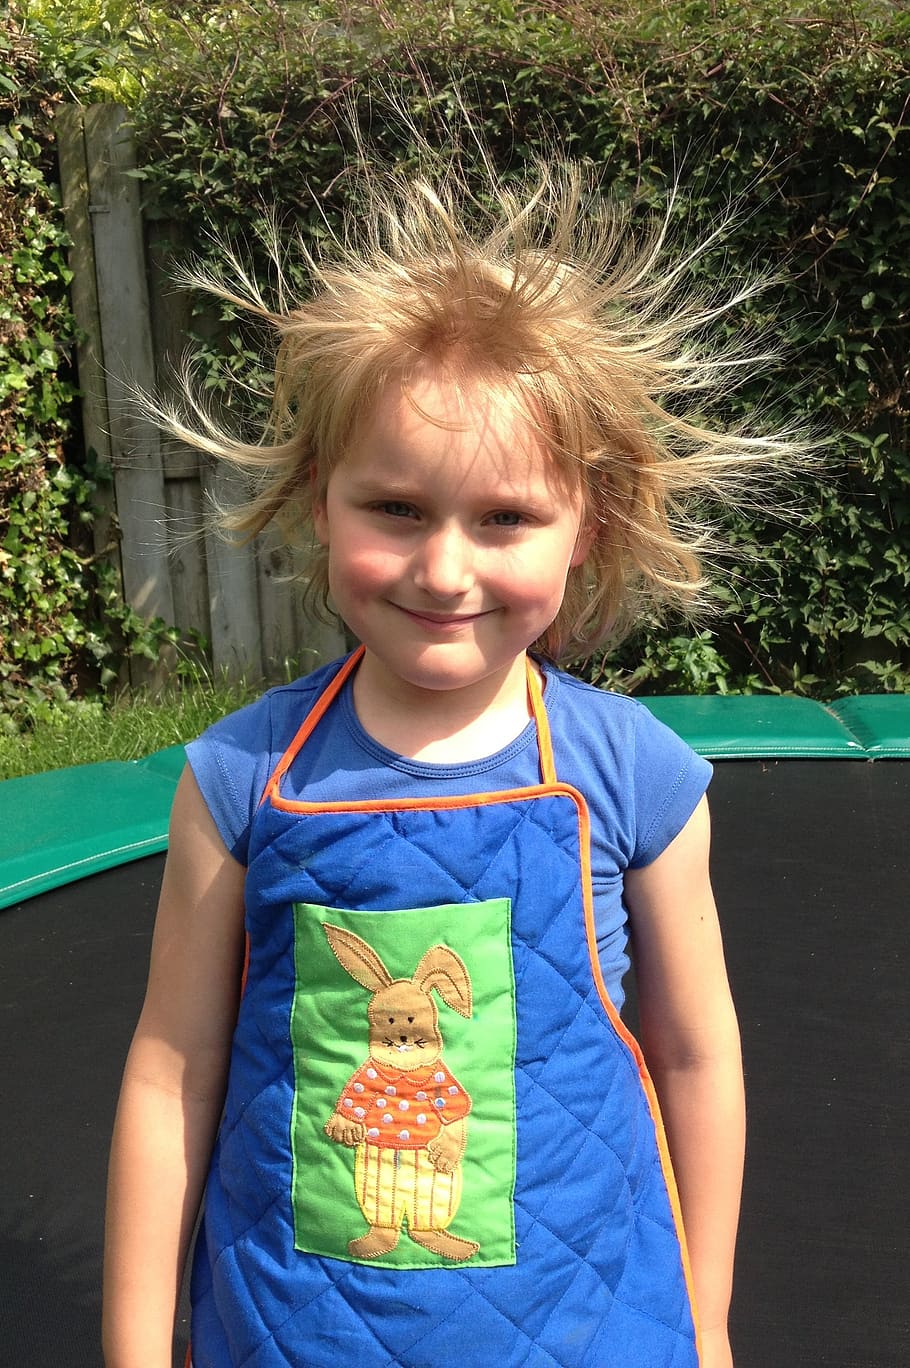 girl, child, trampoline, blonde, static electricity, electricity, childhood, front view, smiling, looking at camera